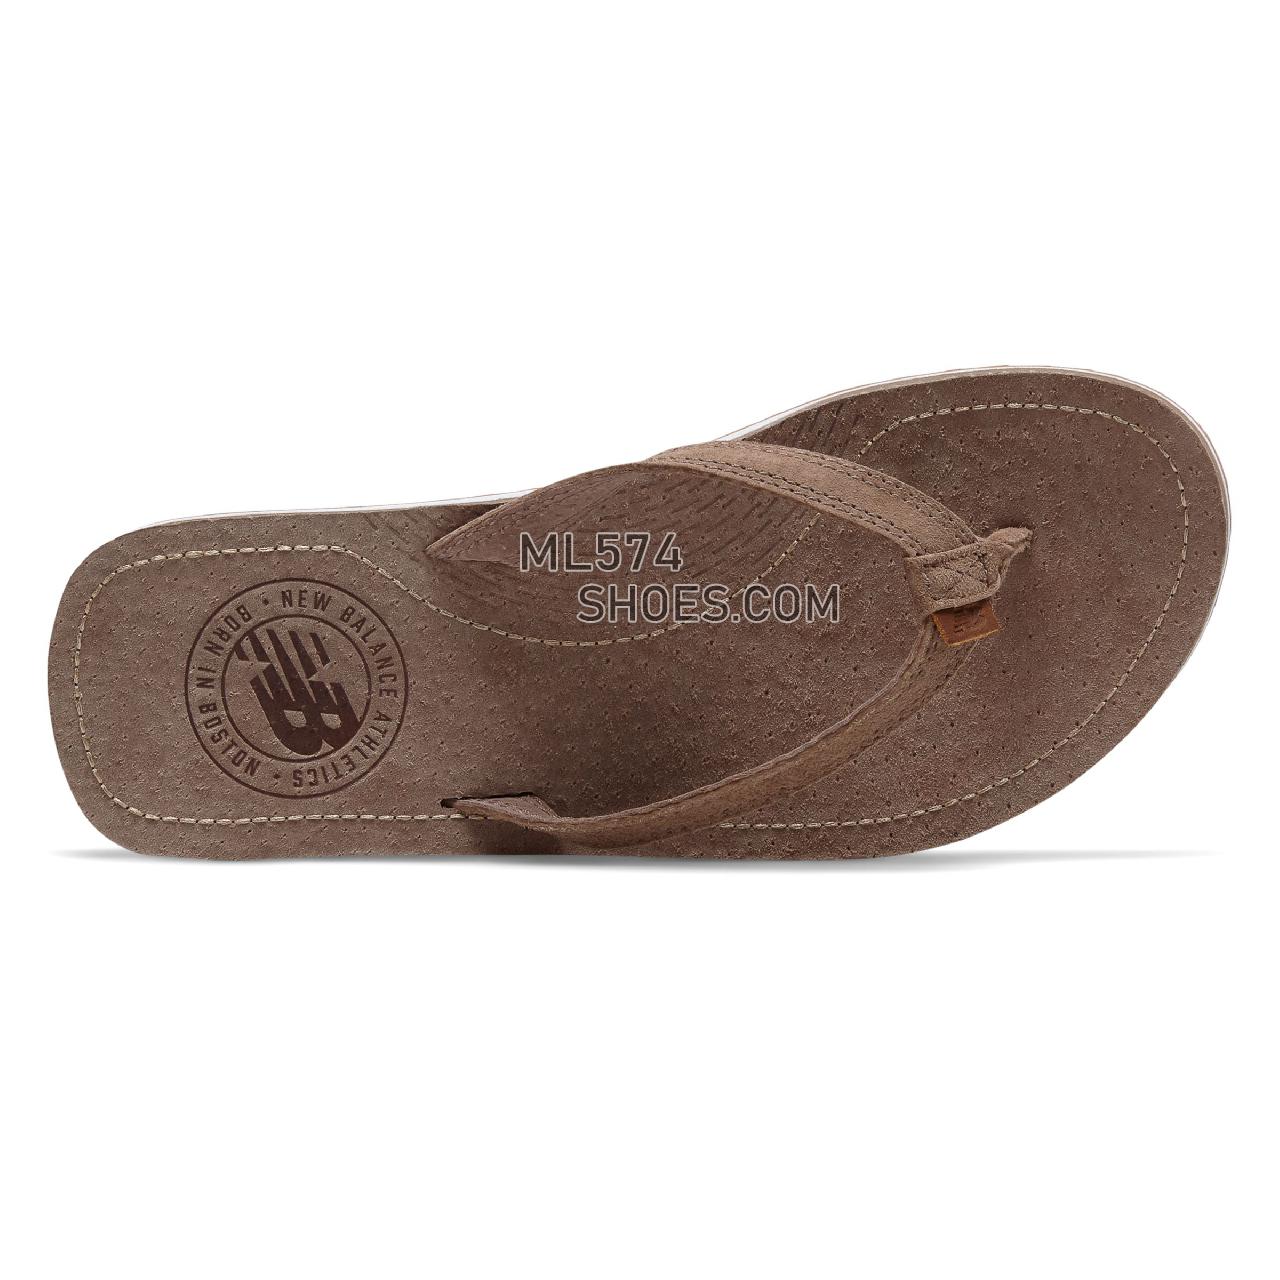 New Balance Classic Thong - Women's 6078 - Sandals Tan with Gum - W6078BRGM